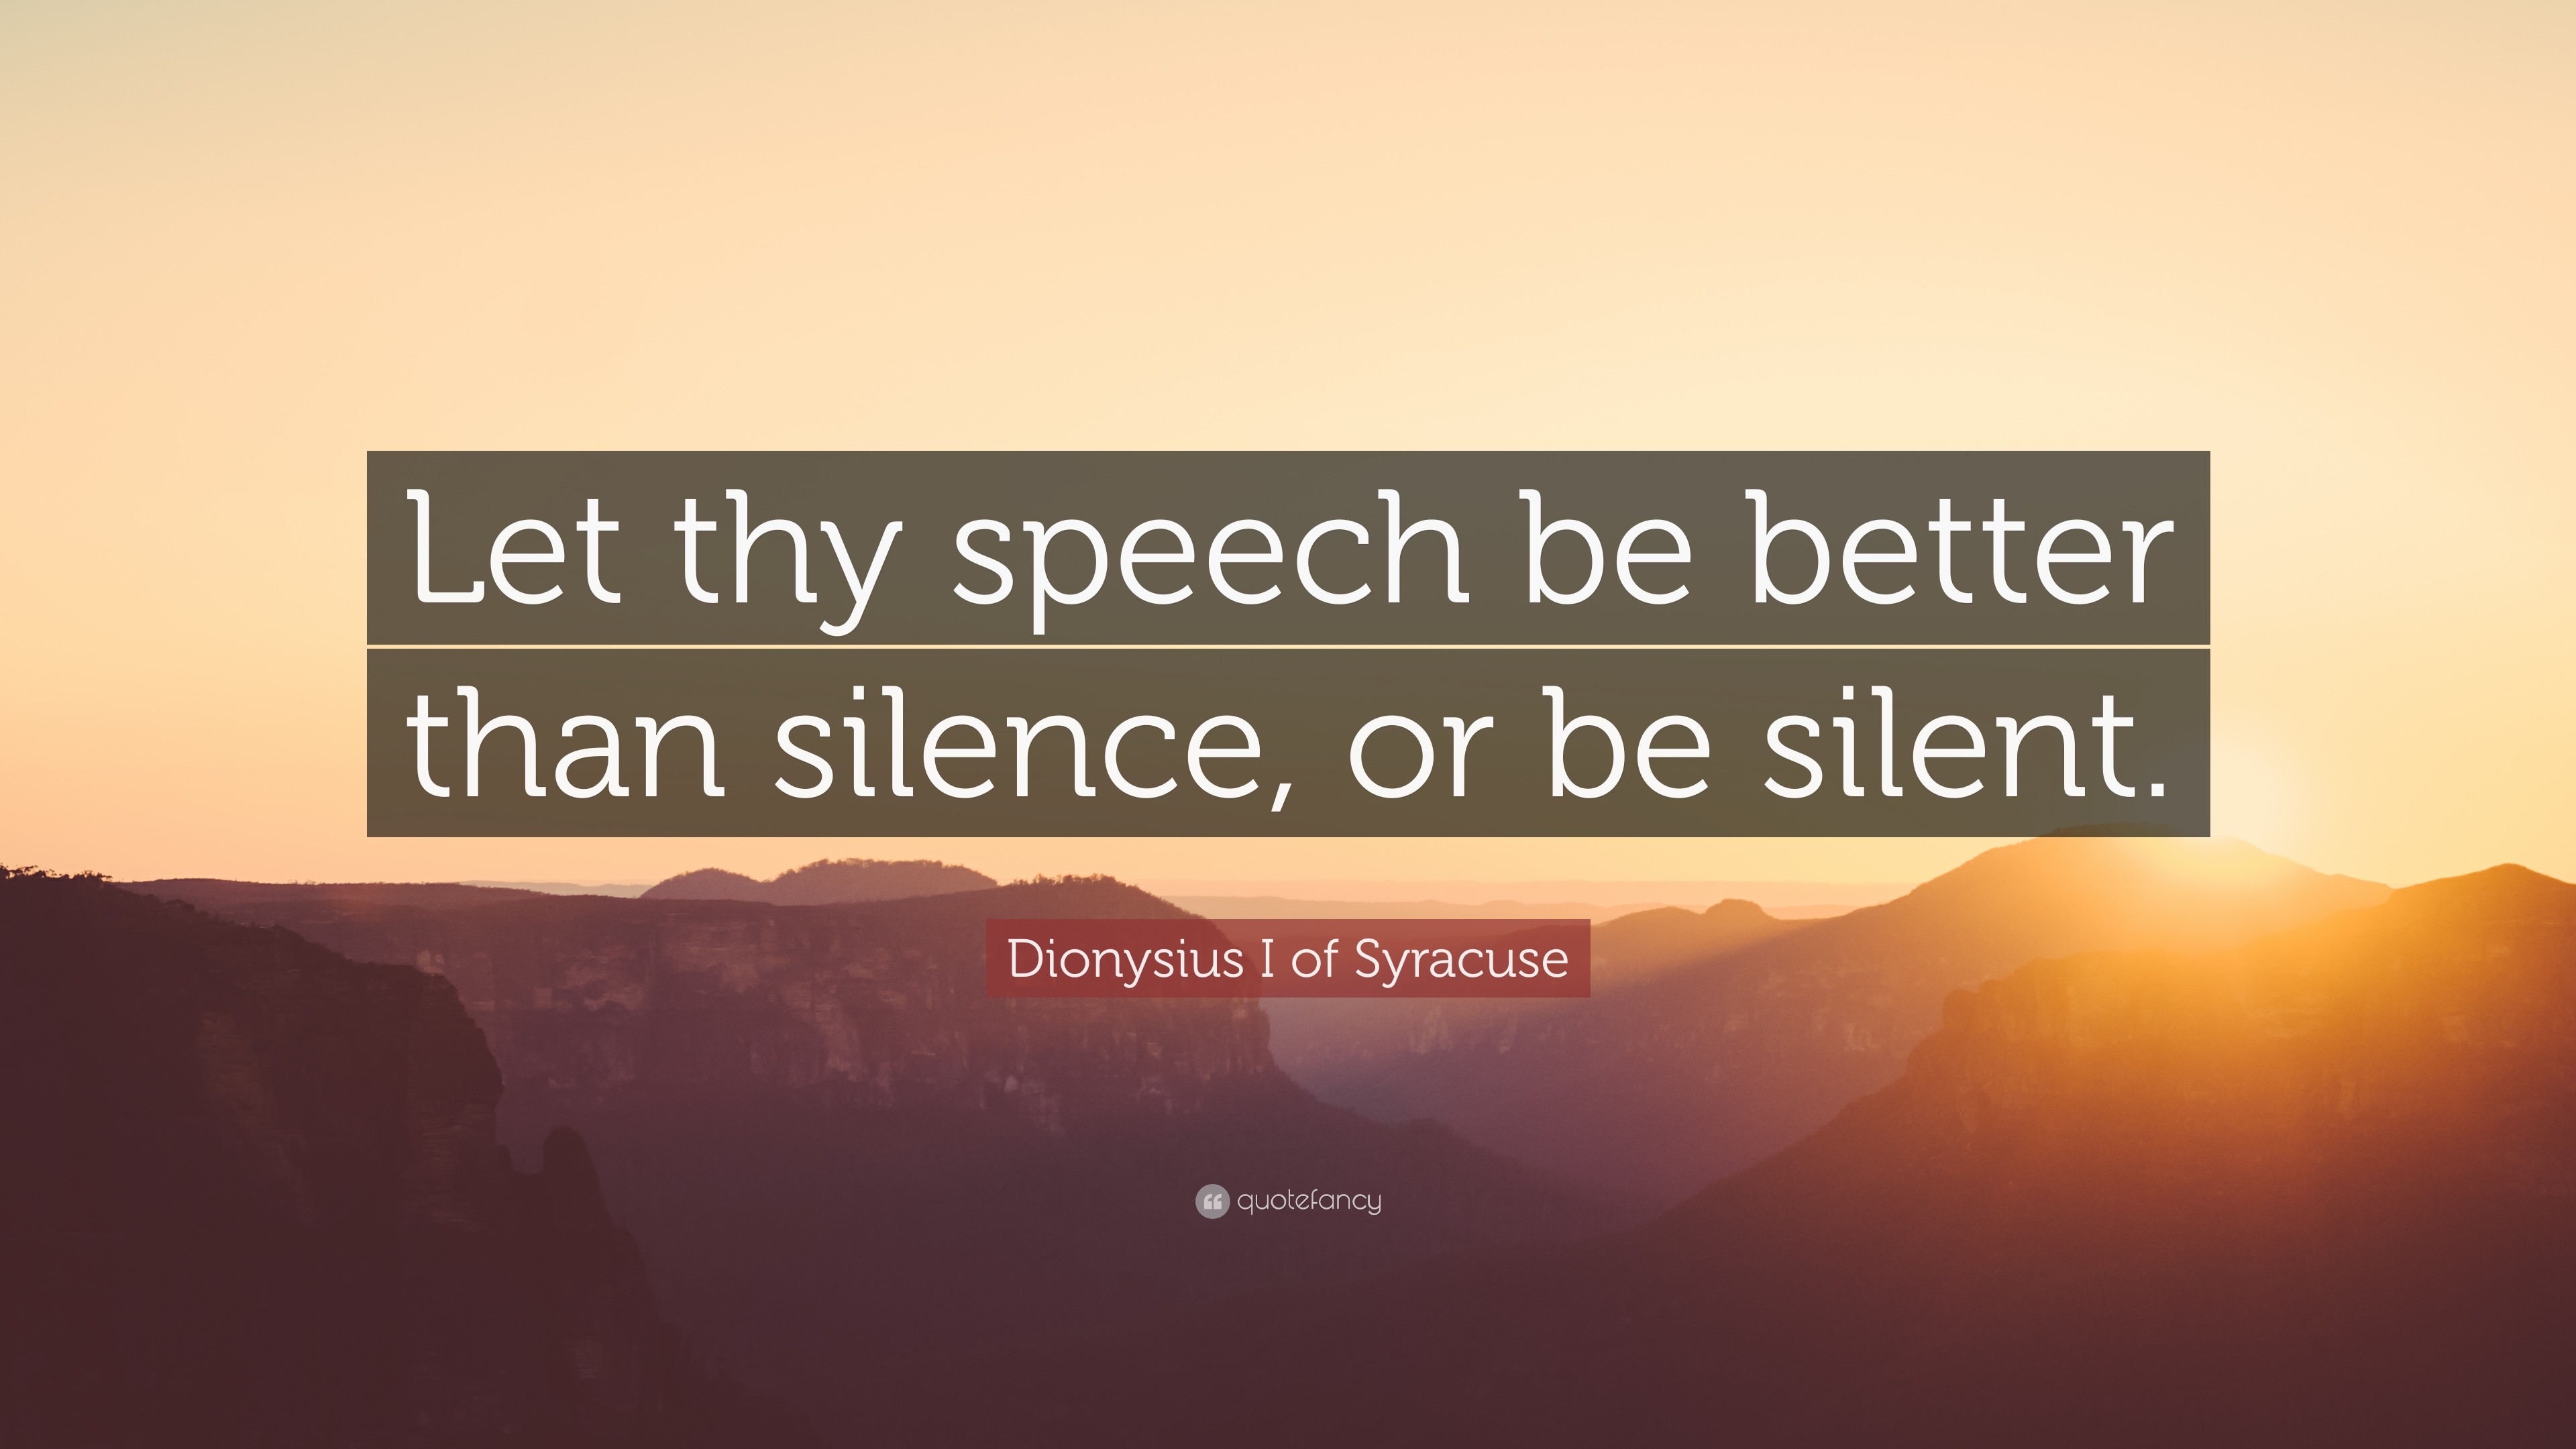 3840x2160 Dionysius I of Syracuse Quote: “Let thy speech be better than silence, or